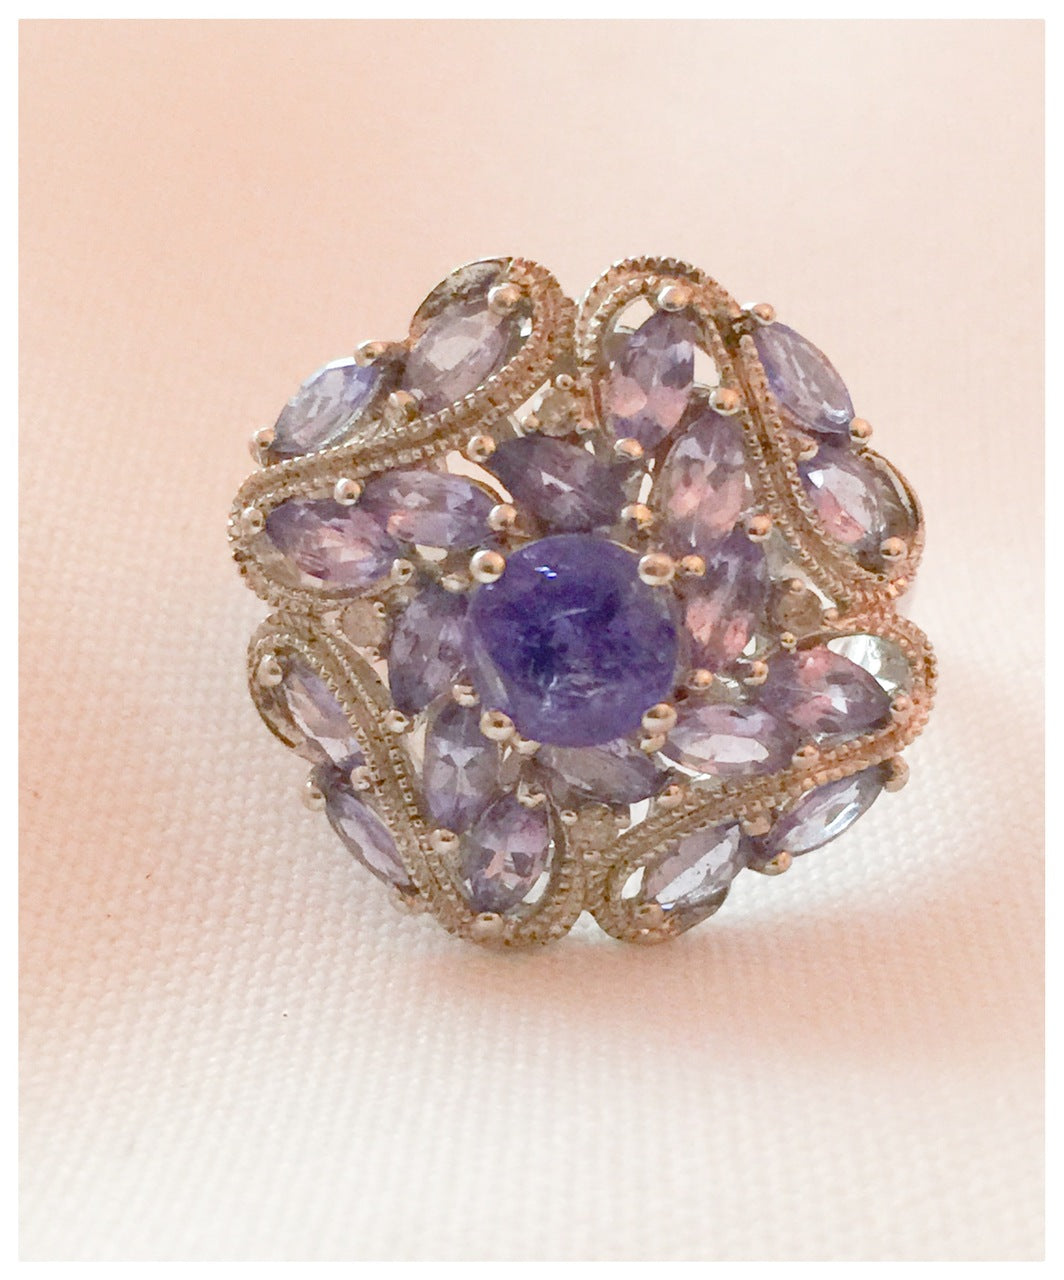 Vintage Sterling Silver Ring with Light Purple Stones Size 10